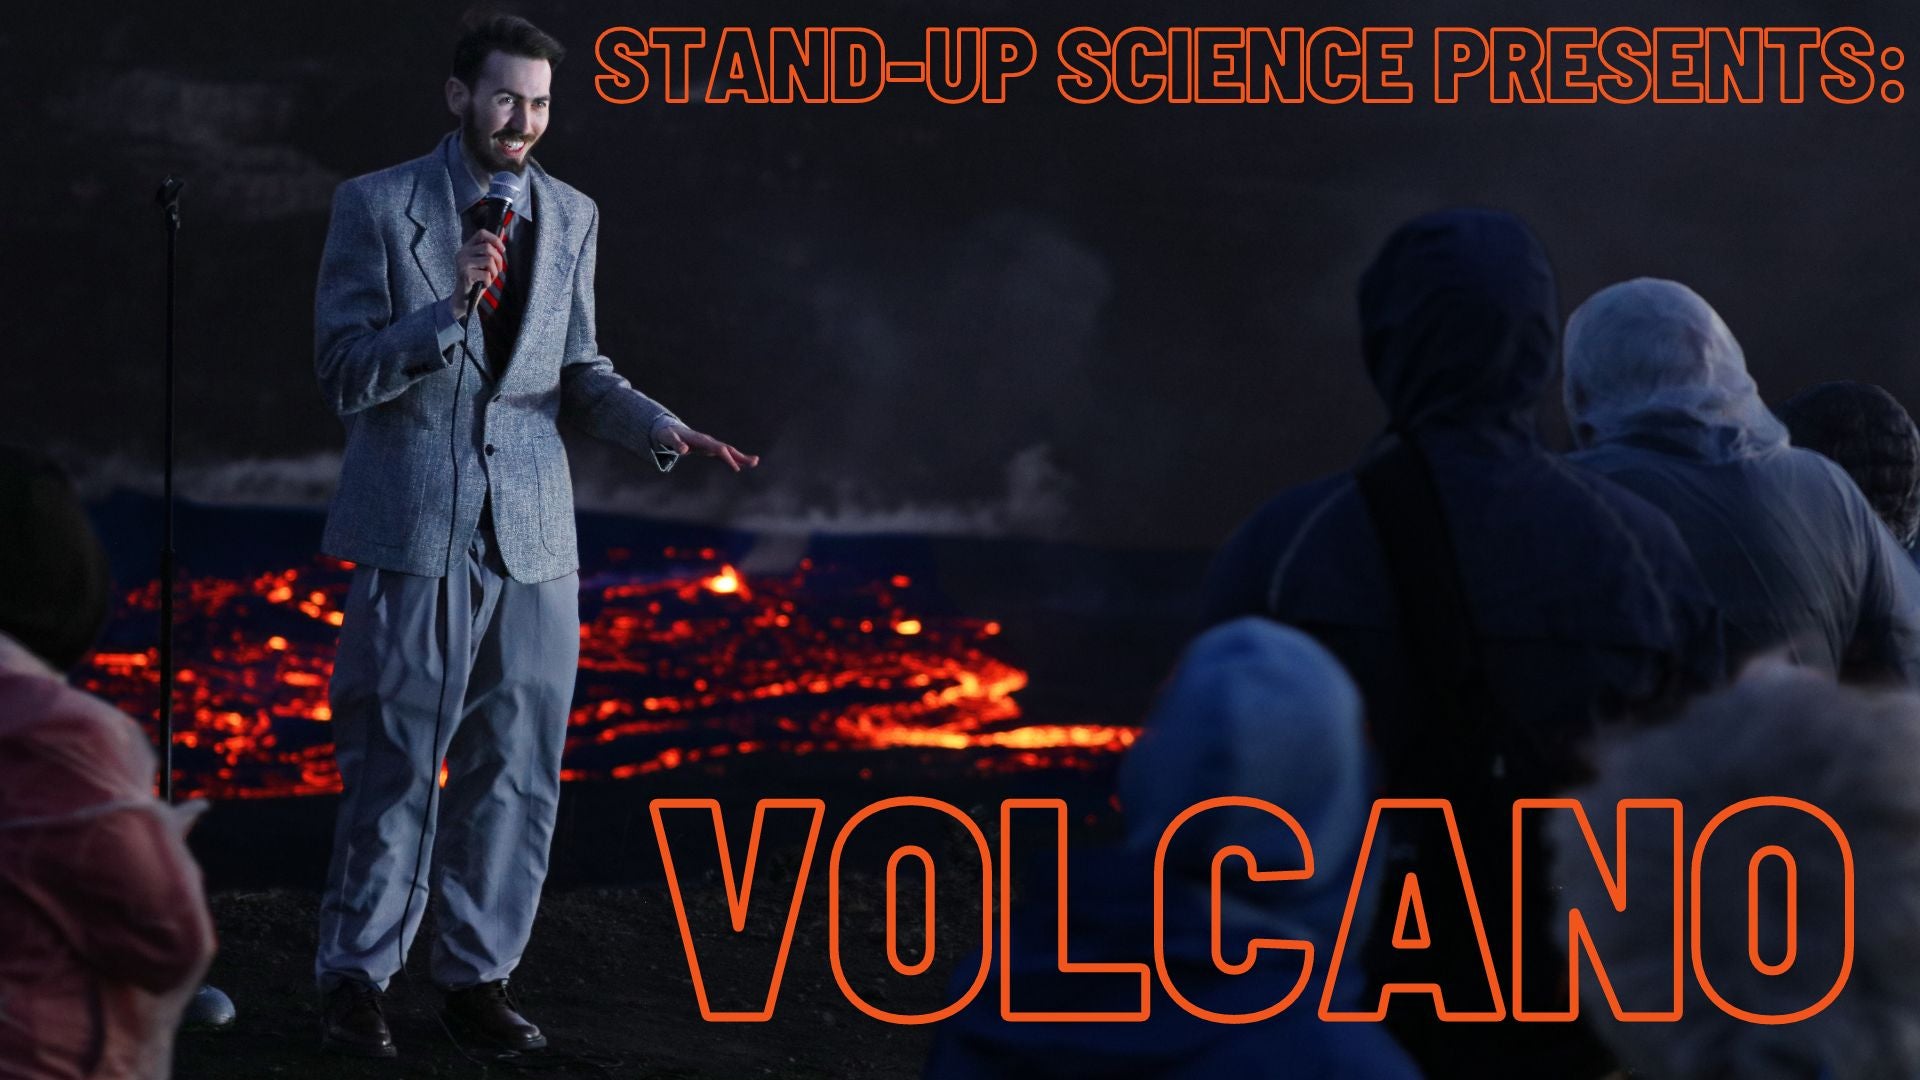 Brand New Science Comedy Show "Volcano" ben Miller at The Attic in Southampton